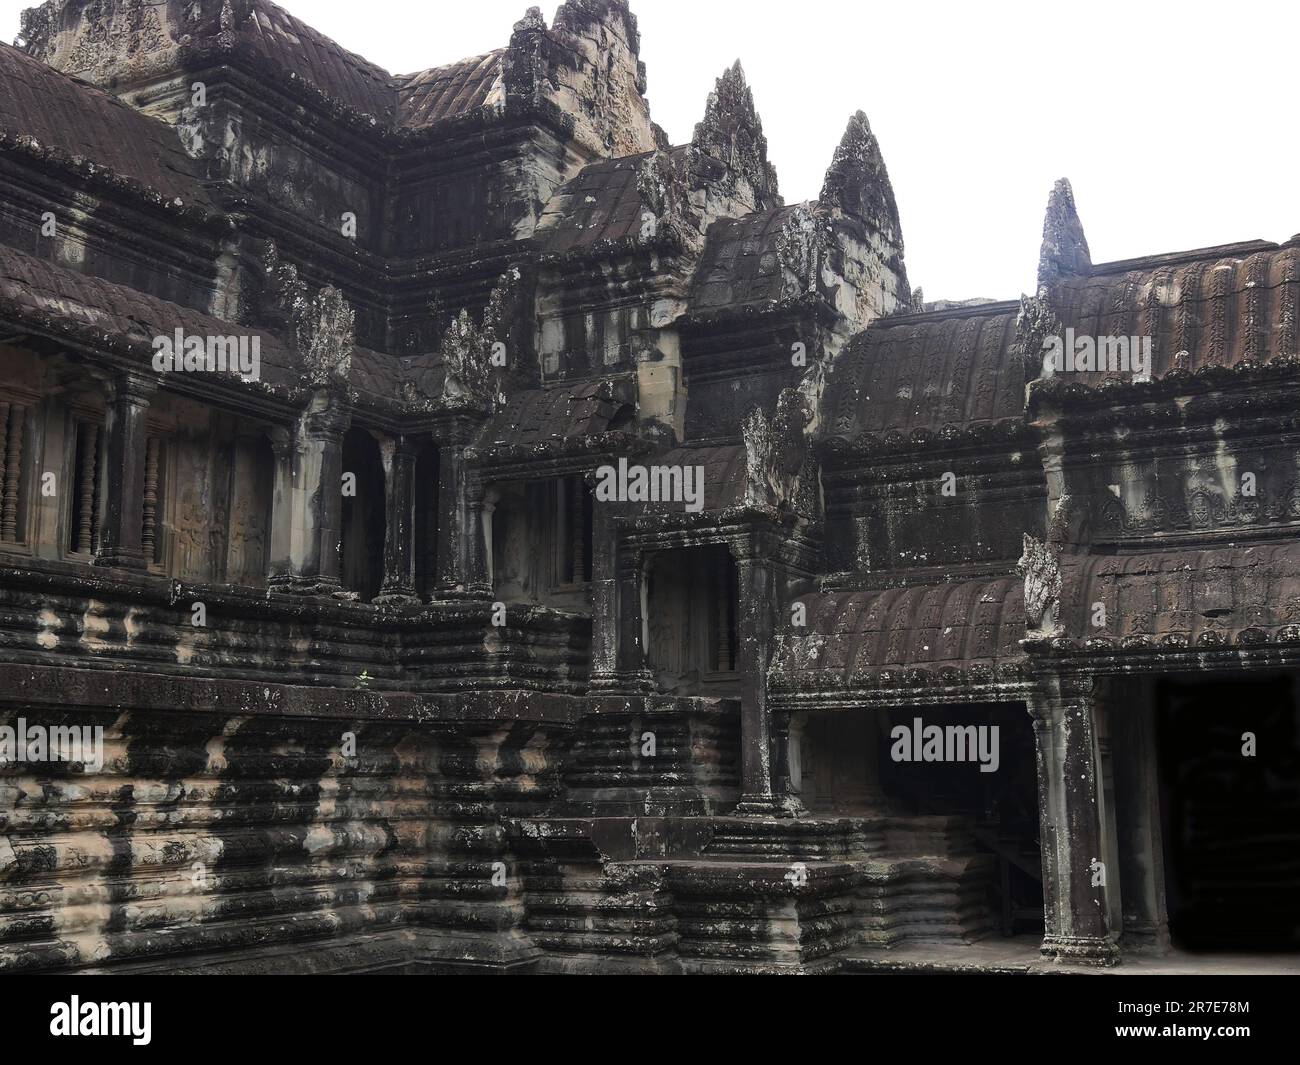 Angkor Wat Temple, Siem Reap Province, Angkor's Temple Complex Site listed as World Heritage by Unesco in 1192, built at the XIIth Century, Cambodia Stock Photo